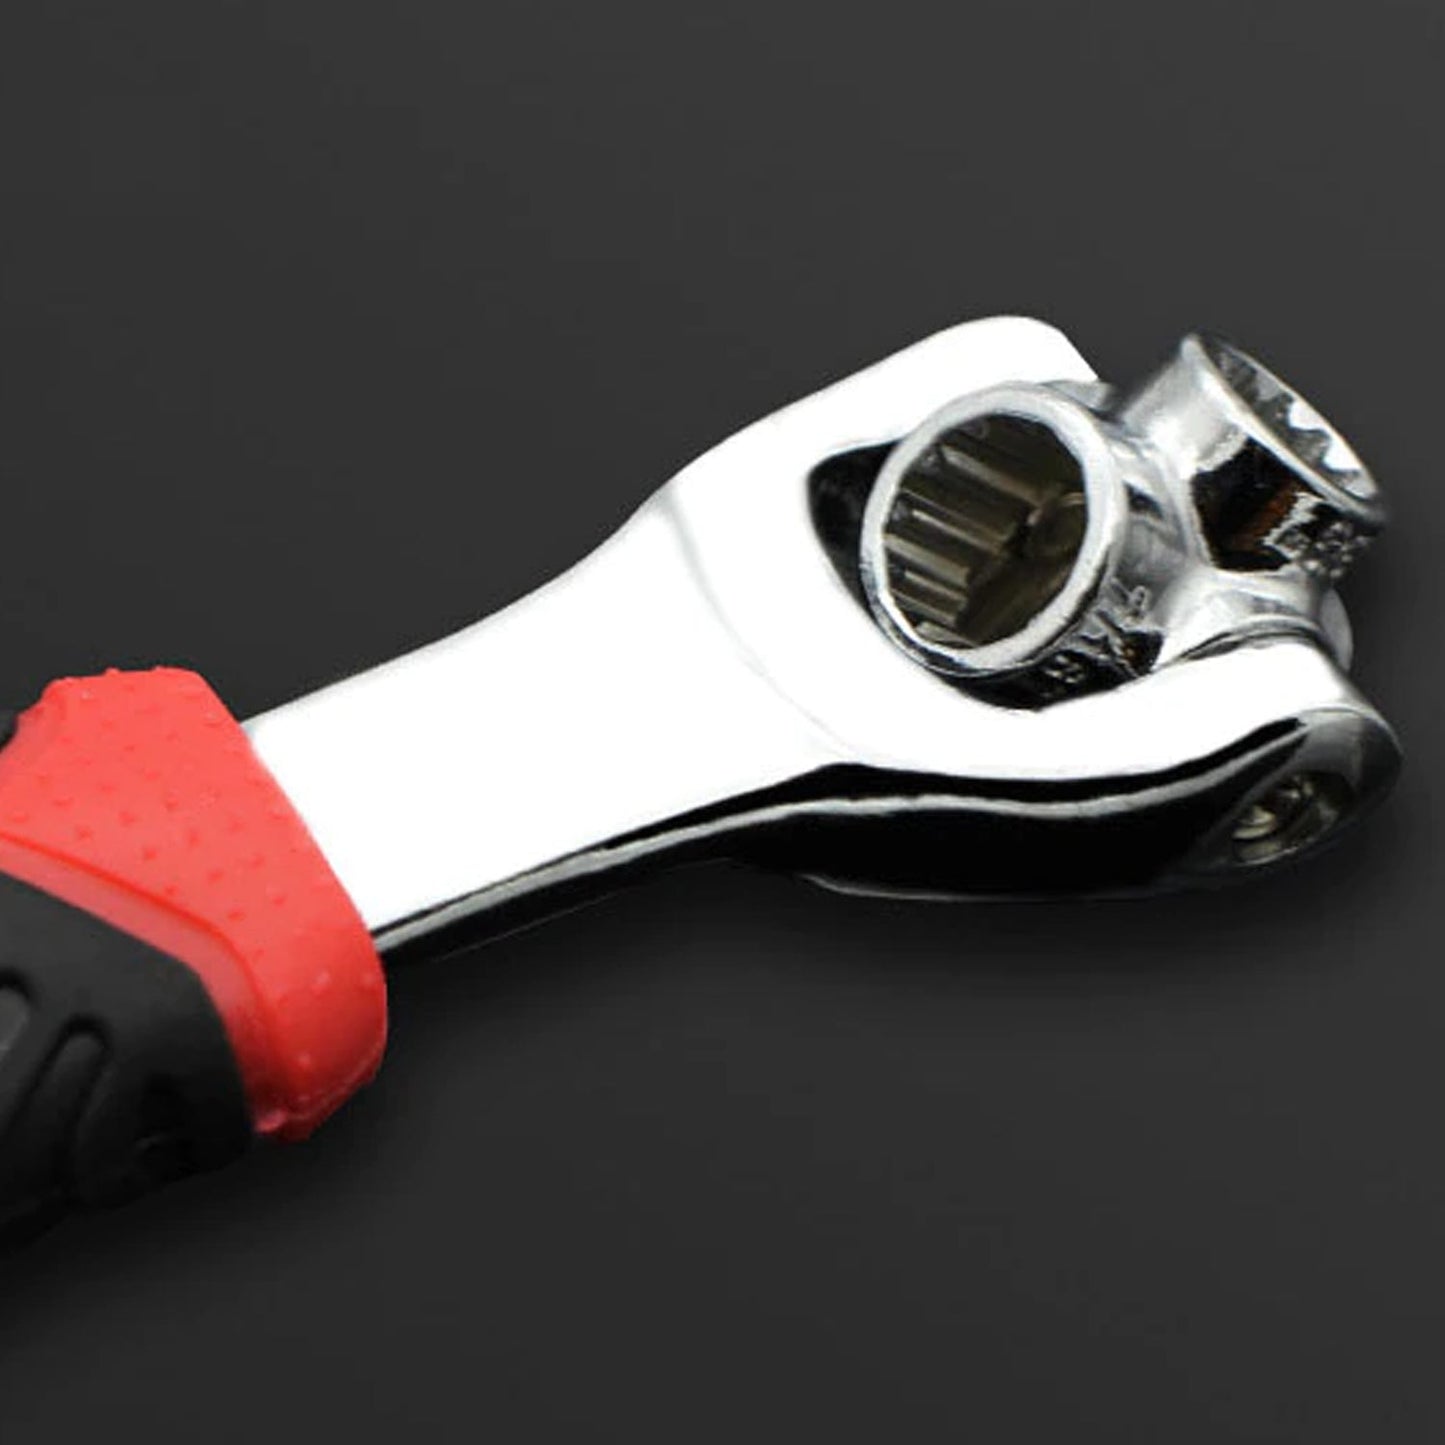 48-in-1 wrench Swivel Head Multi Tool Spanner Tools Socket Works with Spline Bolts Multi function Universal Furniture Car Repair